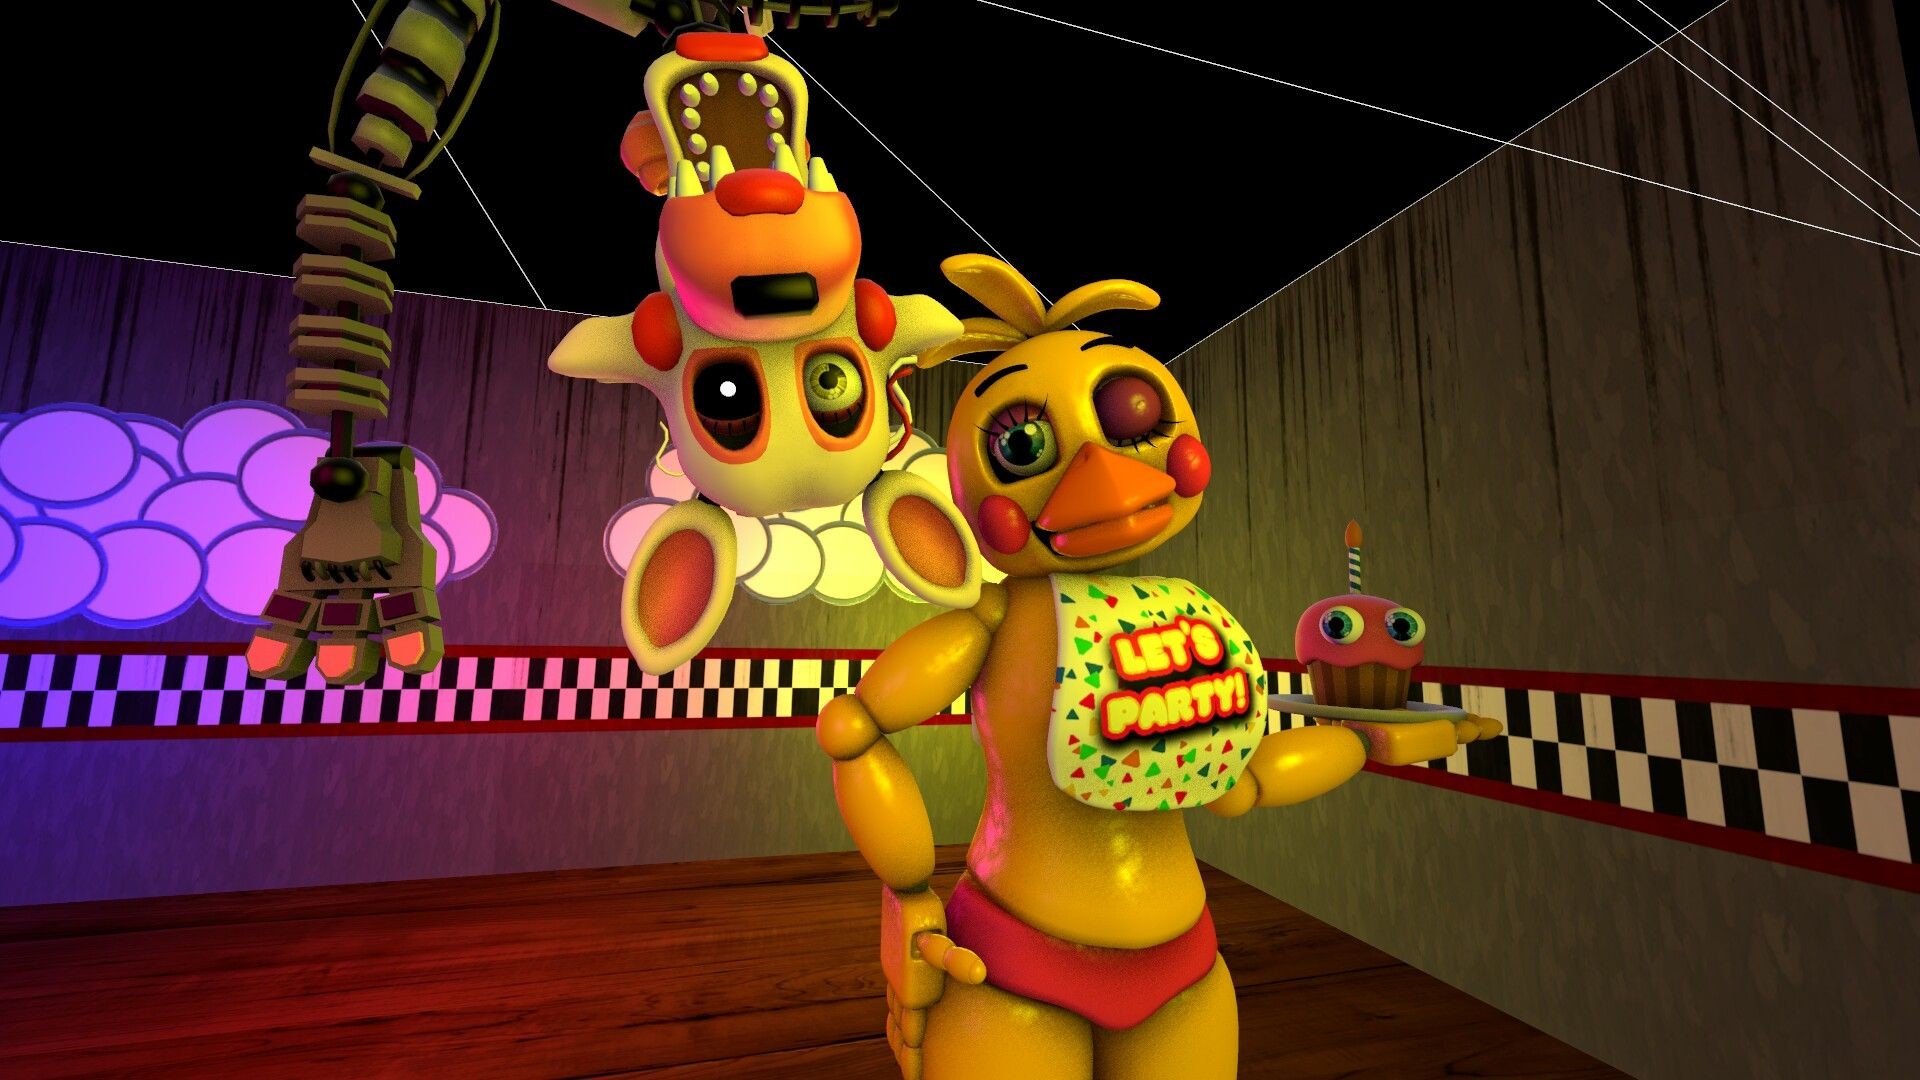 1920x1080 Fnaf Five nights at freddys Toy Chica & Mangle (Ask) sfm bff best friend  forever.